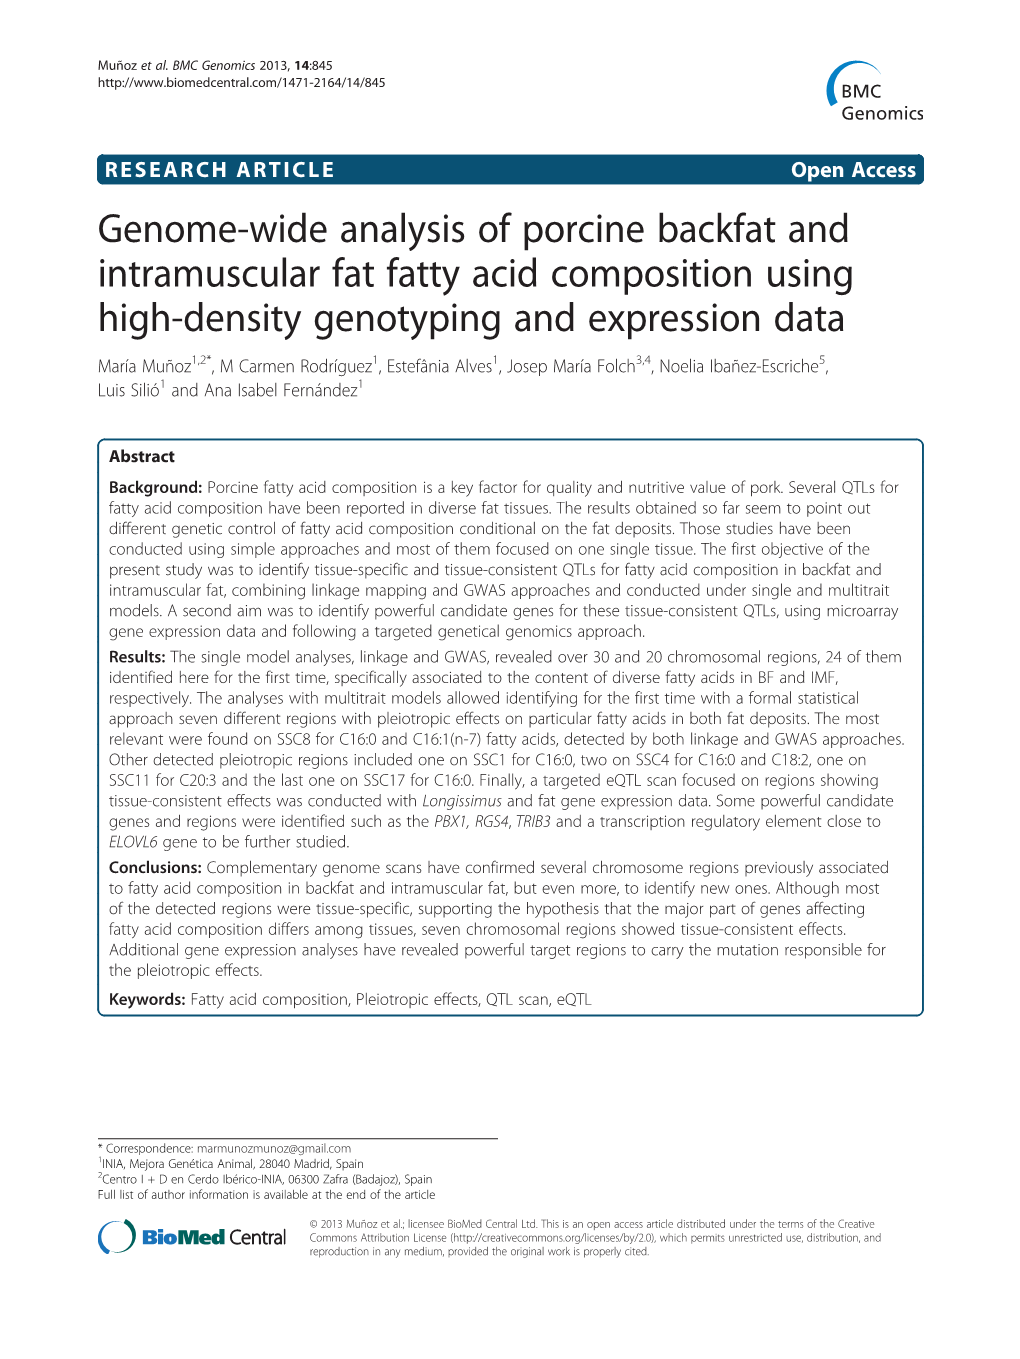 Genome-Wide Analysis of Porcine Backfat and Intramuscular Fat Fatty